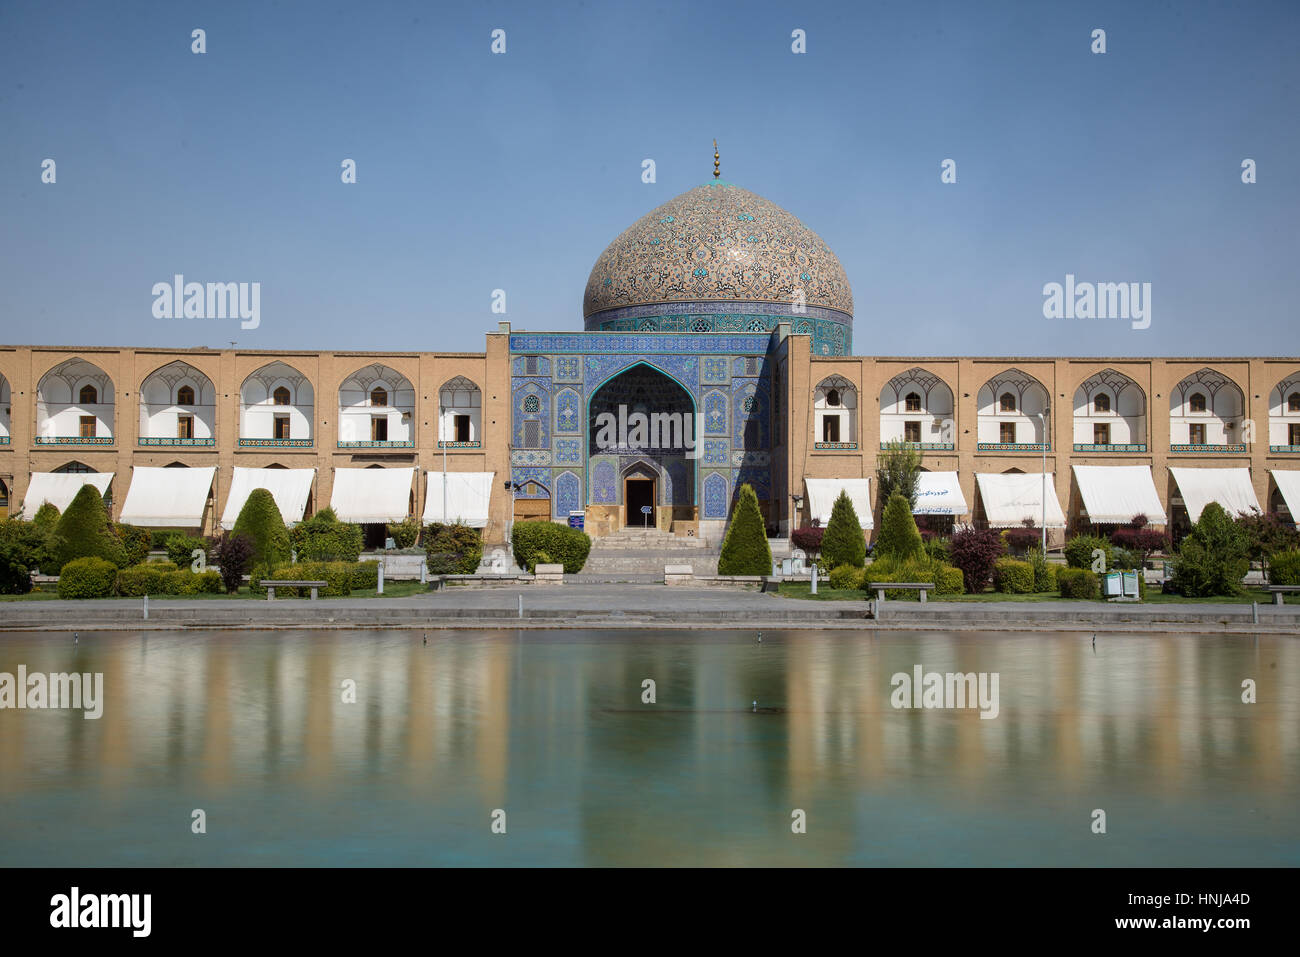 ISFAHAN, IRAN - AUG 29, 2016: Sheikh Lotfollah Mosque east of Naqsh-e Jahan Square, Isfahan - one of the UNESCO world heritage sites Stock Photo